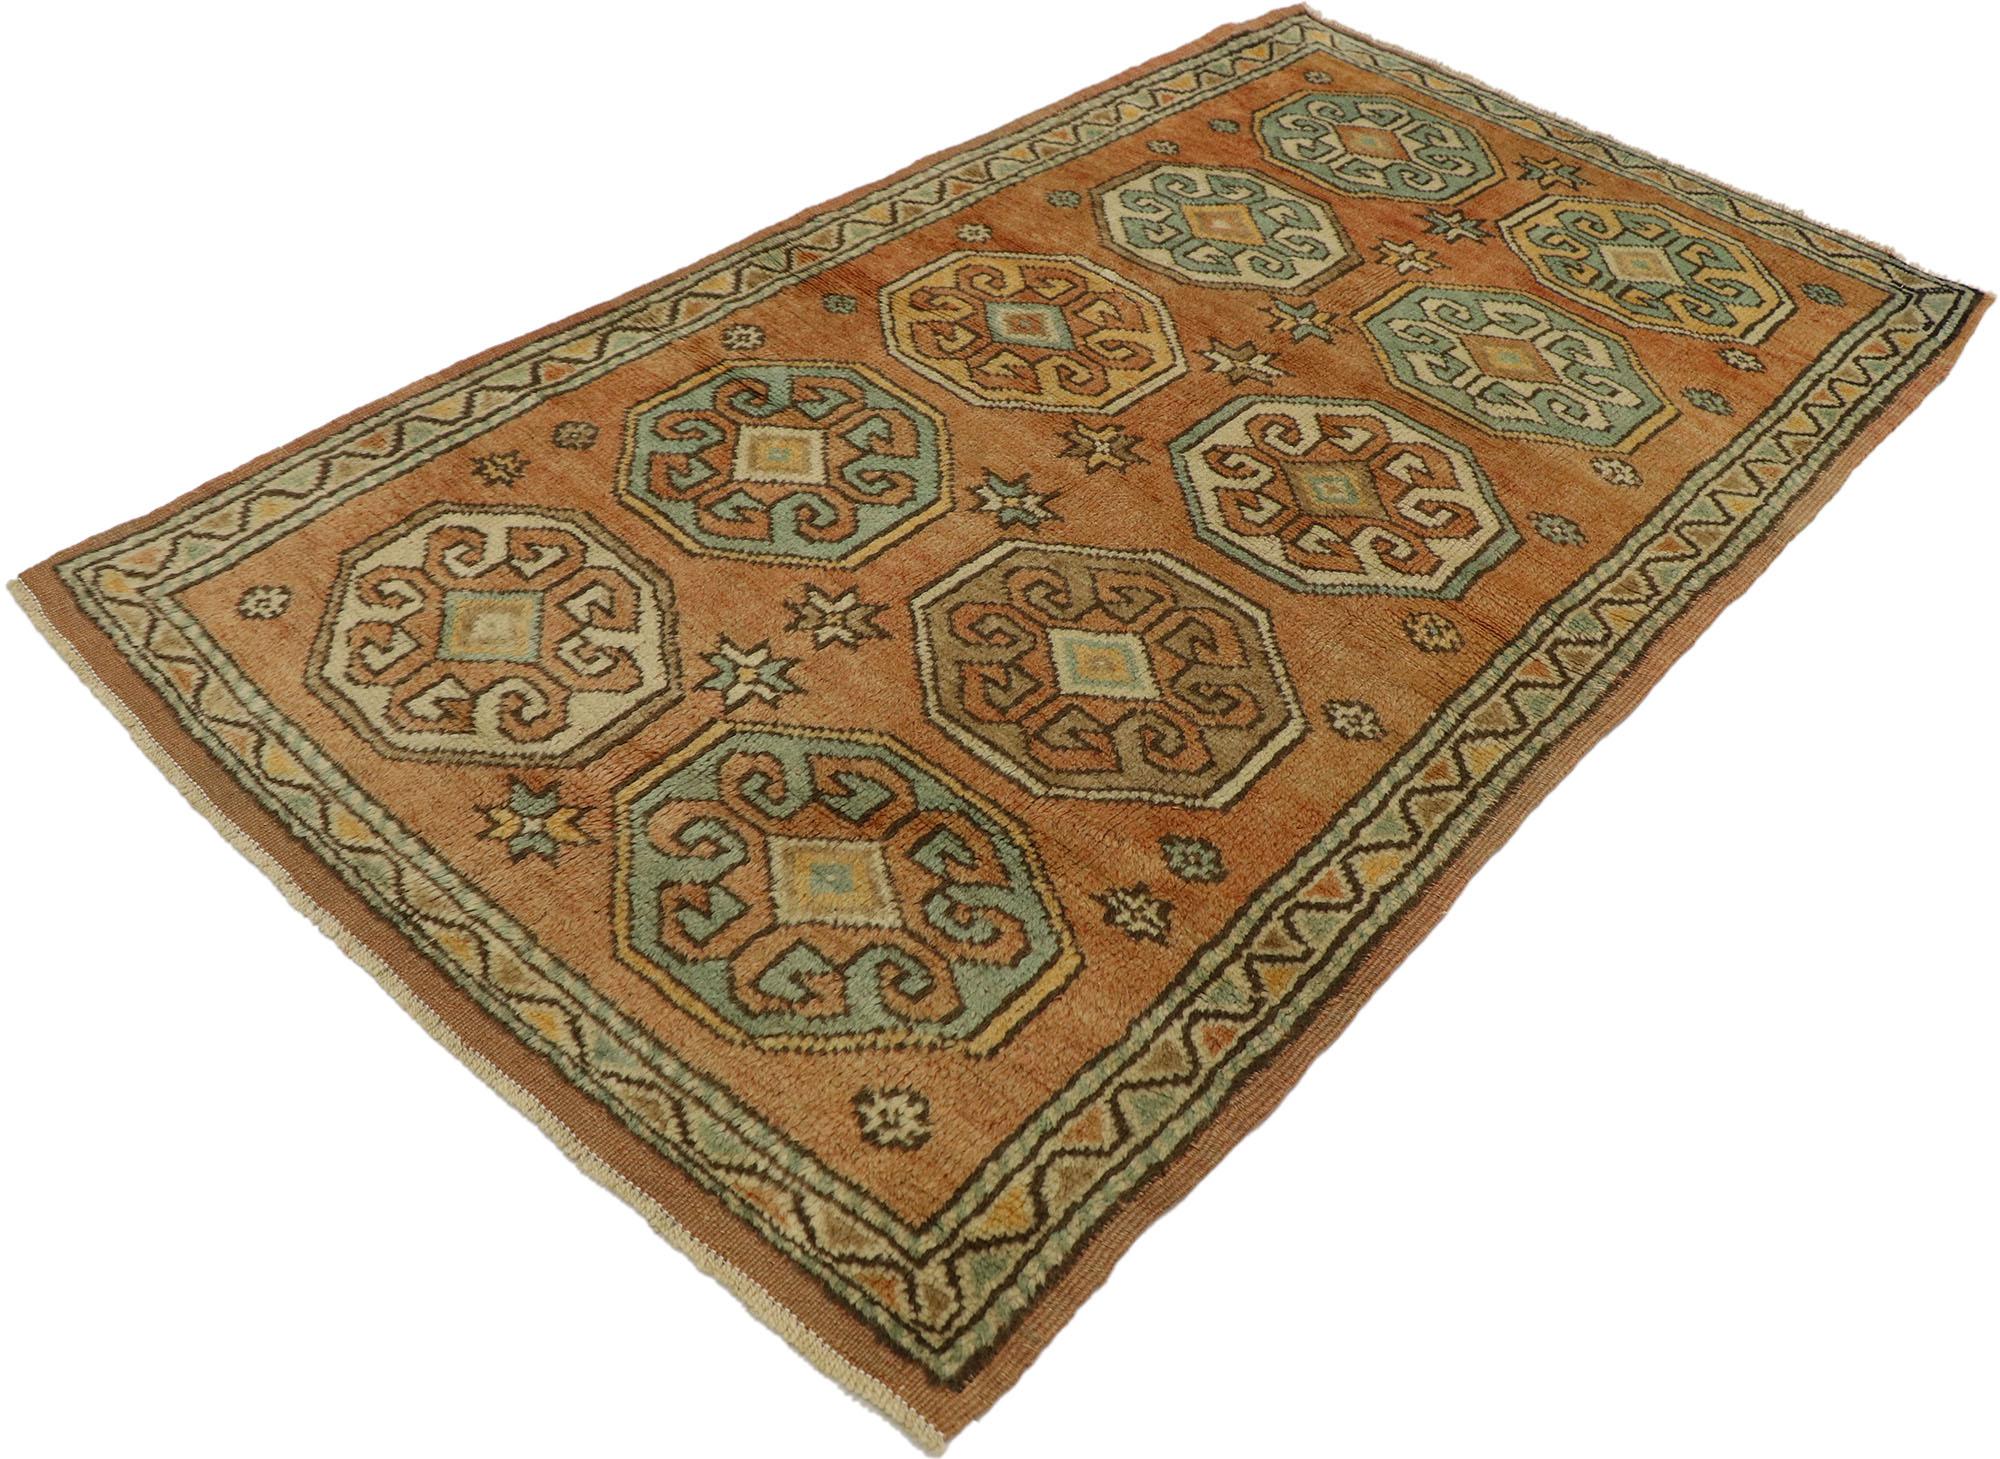 53179, vintage Turkish Oushak rug with Rustic Spanish Revival style. This hand-knotted wool vintage Turkish Oushak rug features two columns of octagonal medallions surrounded by eight-pointed stars and rosettes floating upon an abrashed orange